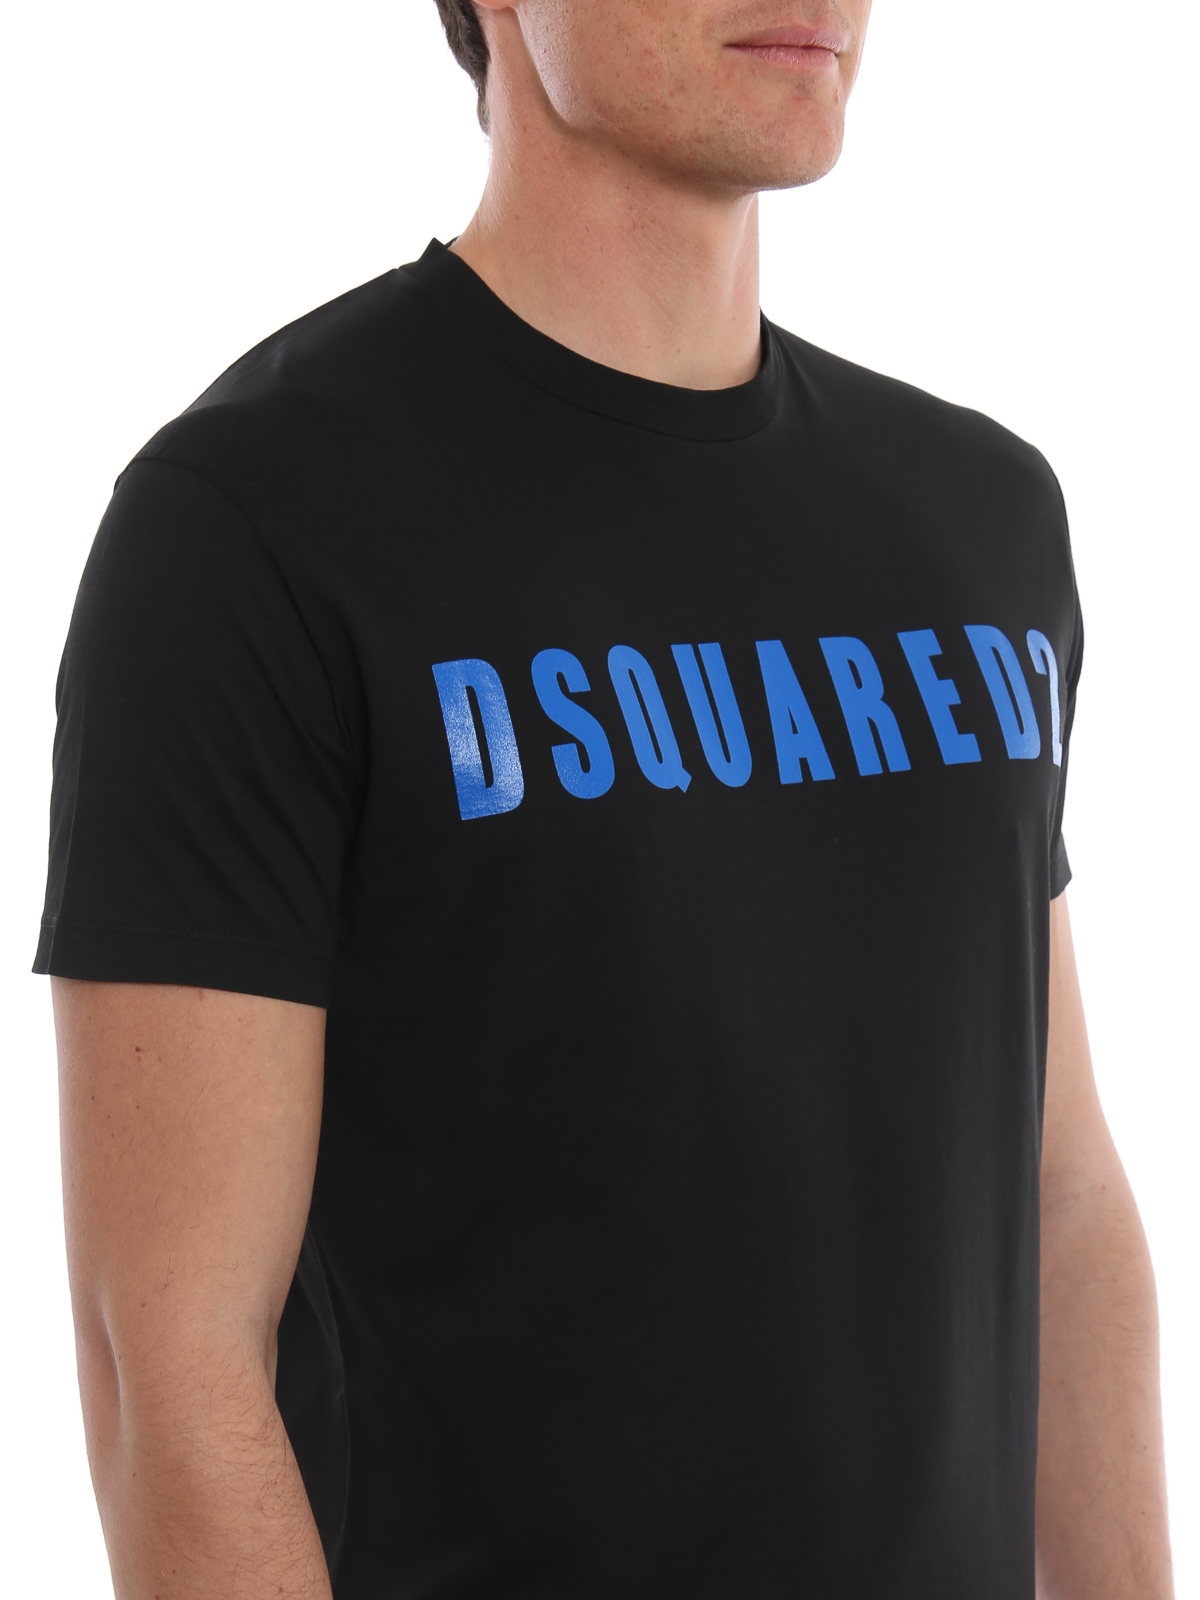 dsquared2 buy online